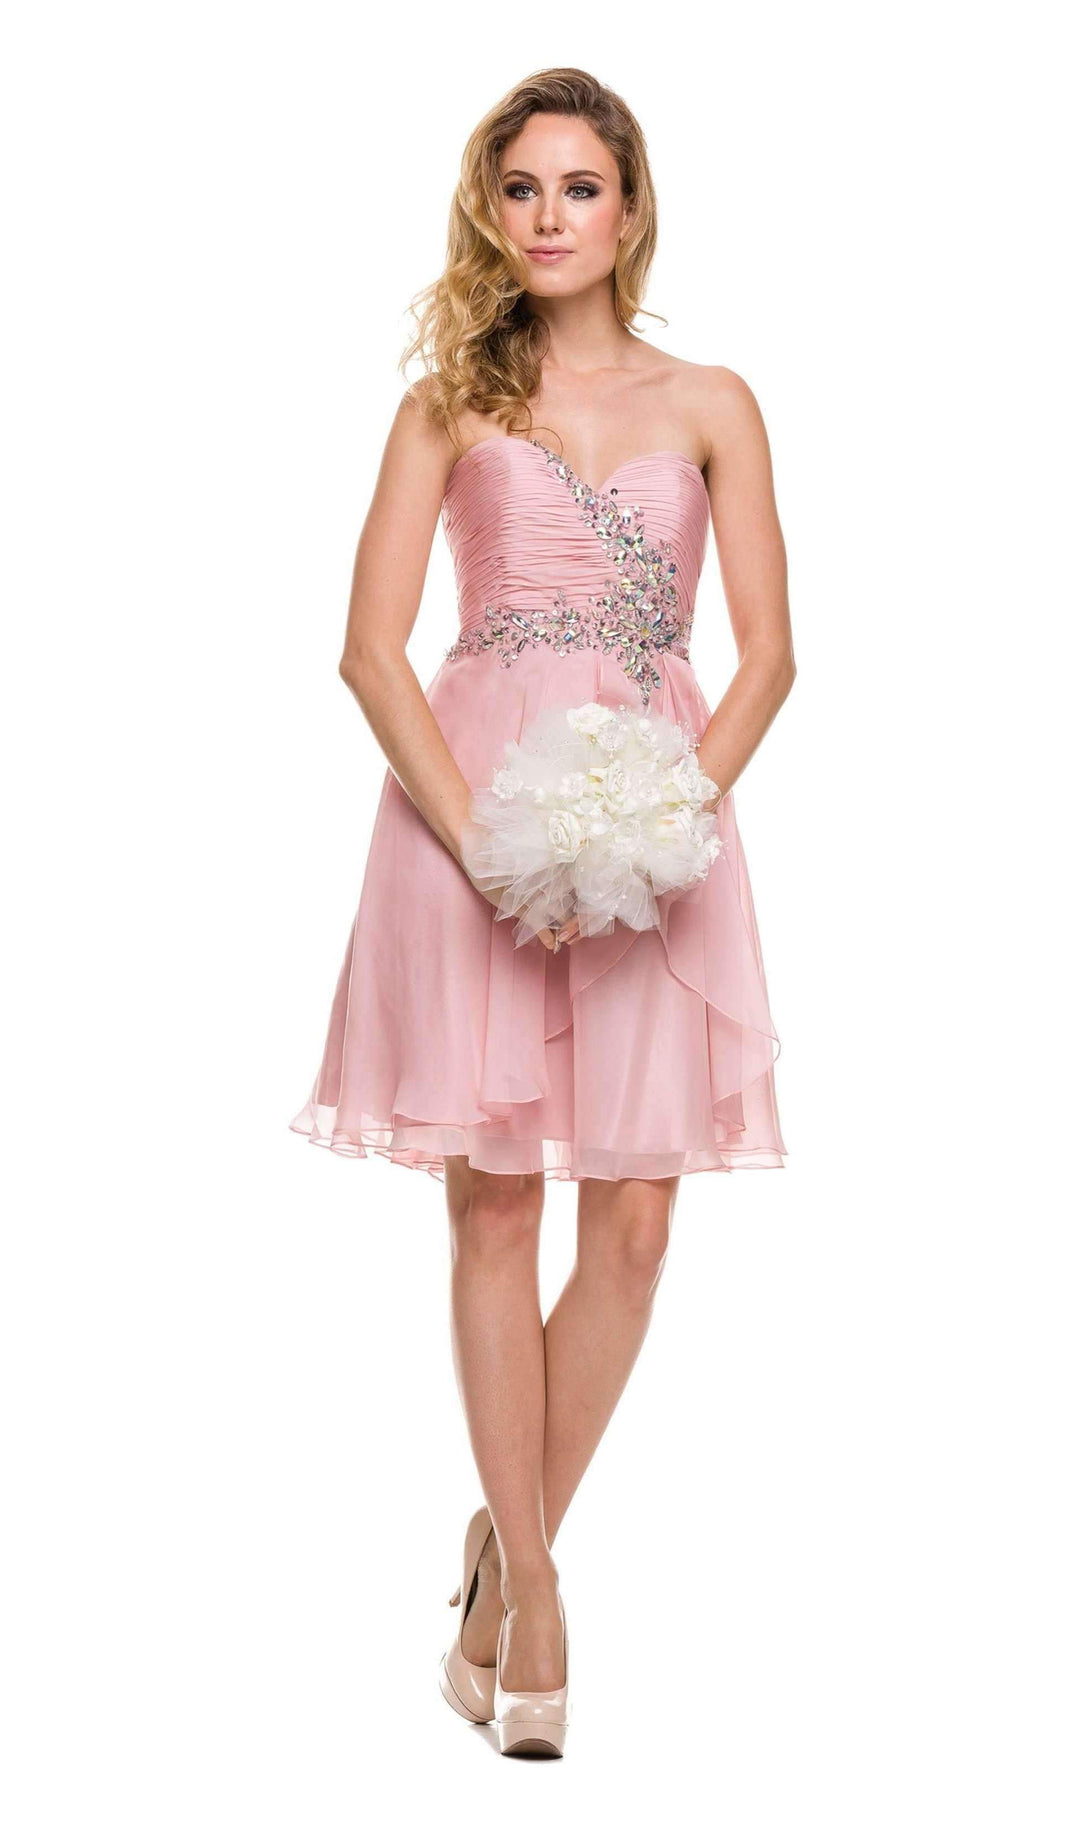 Beaded Short Strapless Sweetheart Dress with Corset Back by Juliet 741-Short Cocktail Dresses-ABC Fashion